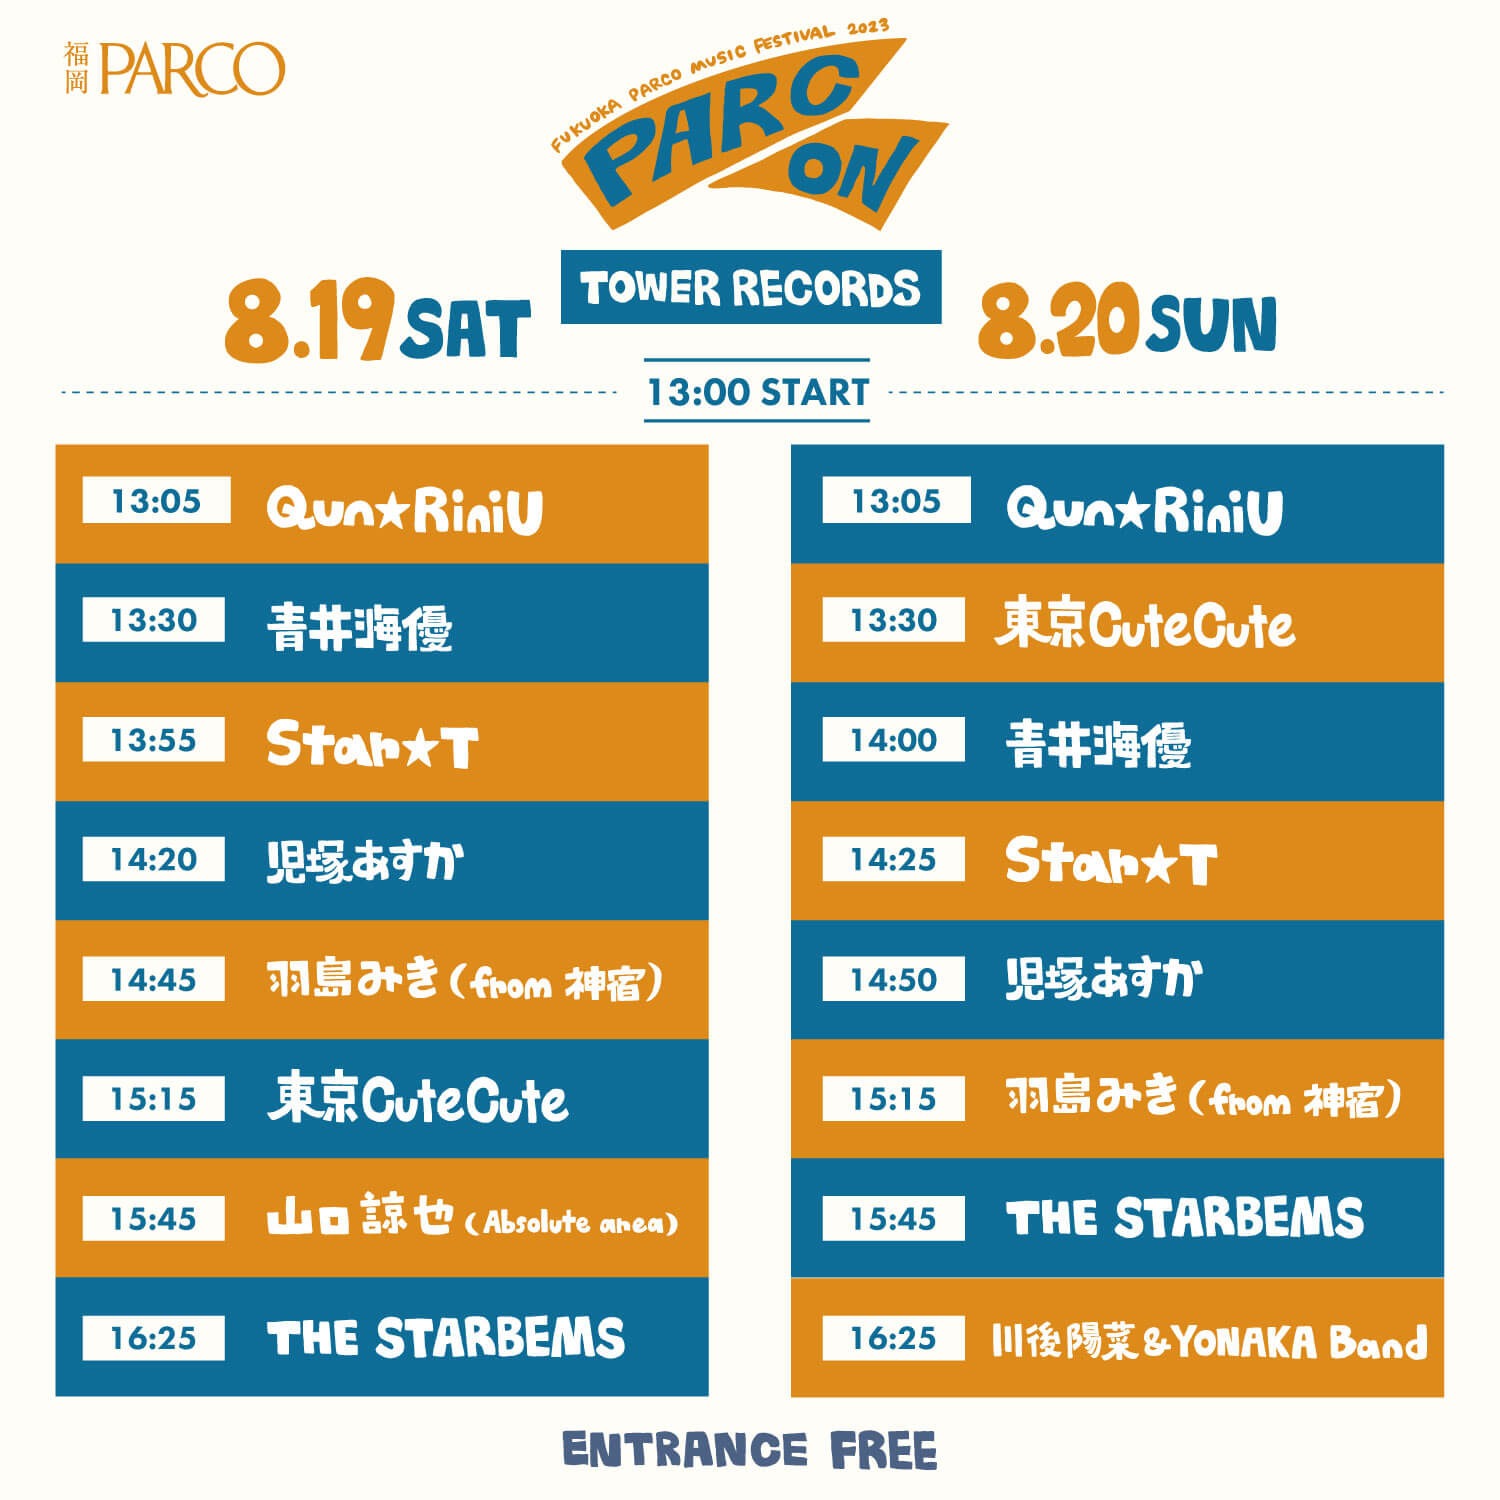 TOWER RECORDS TIME TABLE